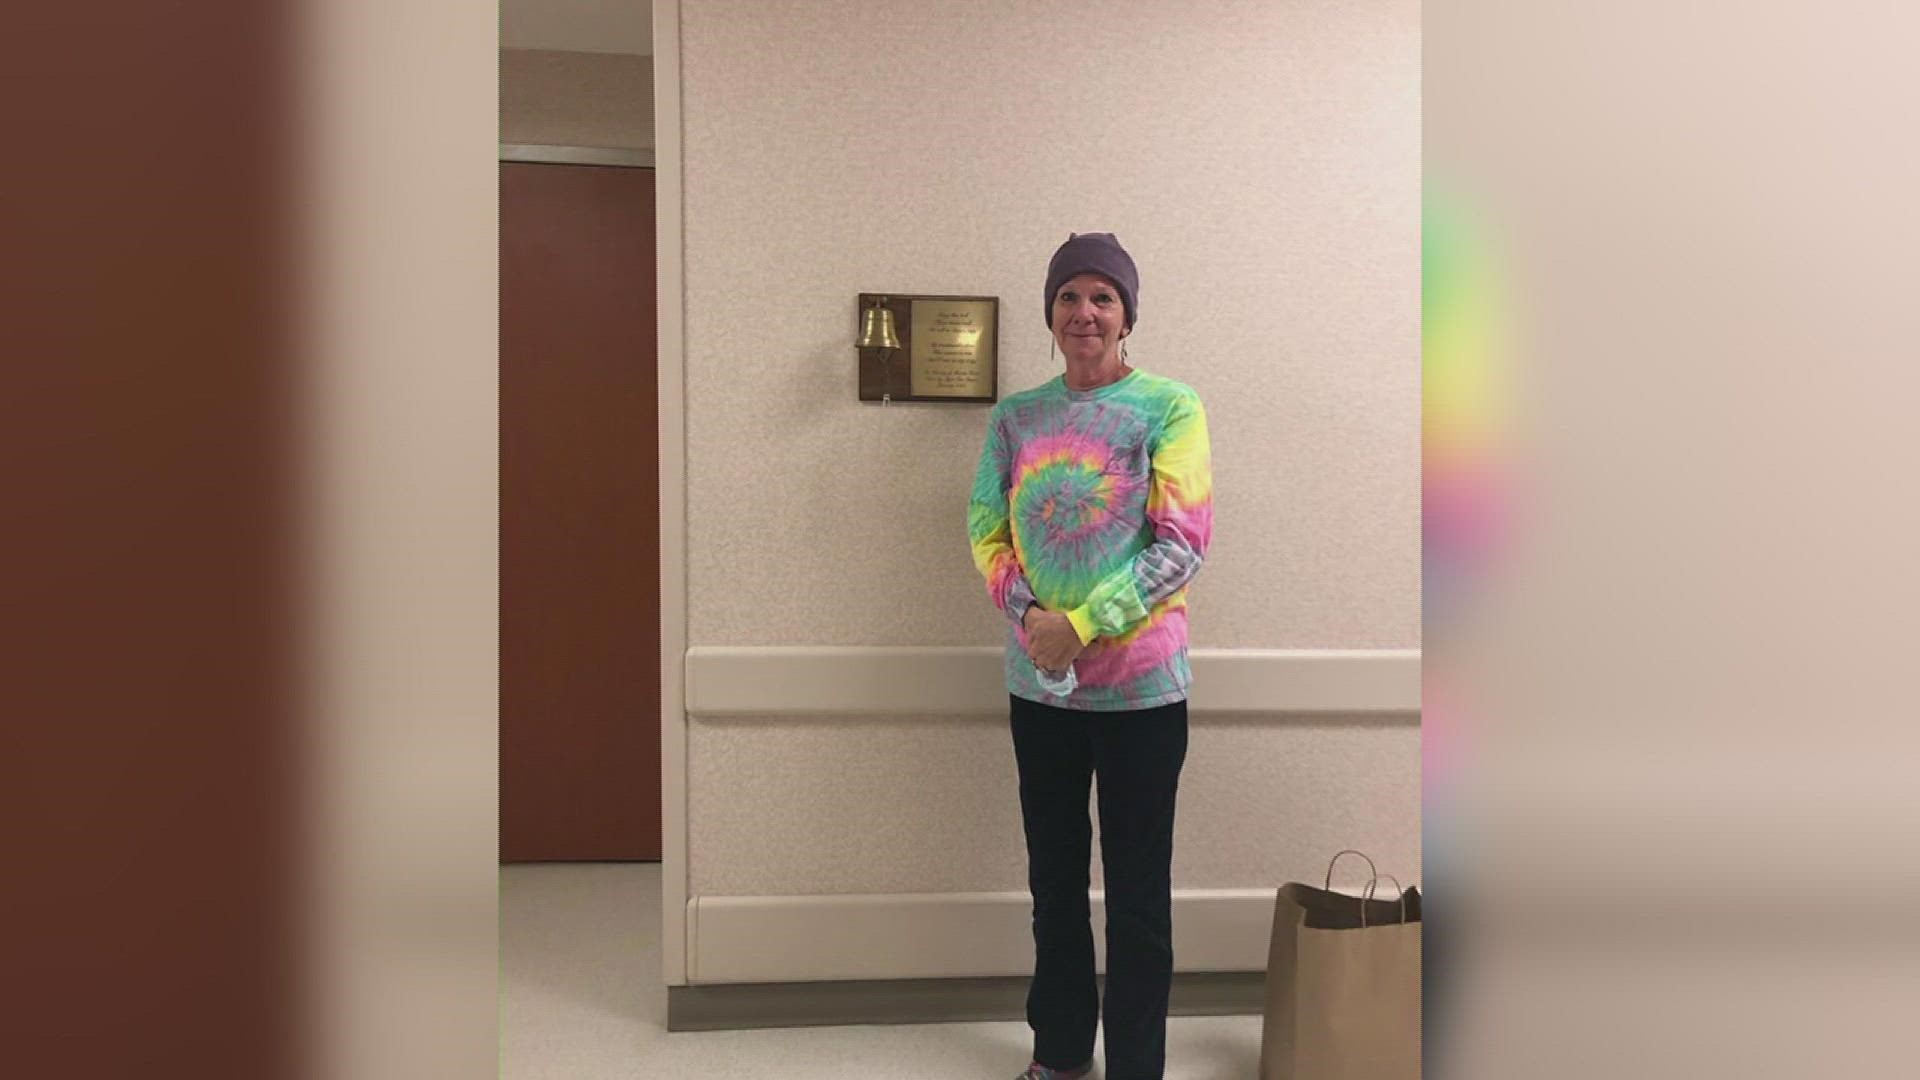 A breast cancer survivor and Beaumont non-profit organization are urging others to get screened and tested, stating early detection is the key to survival.